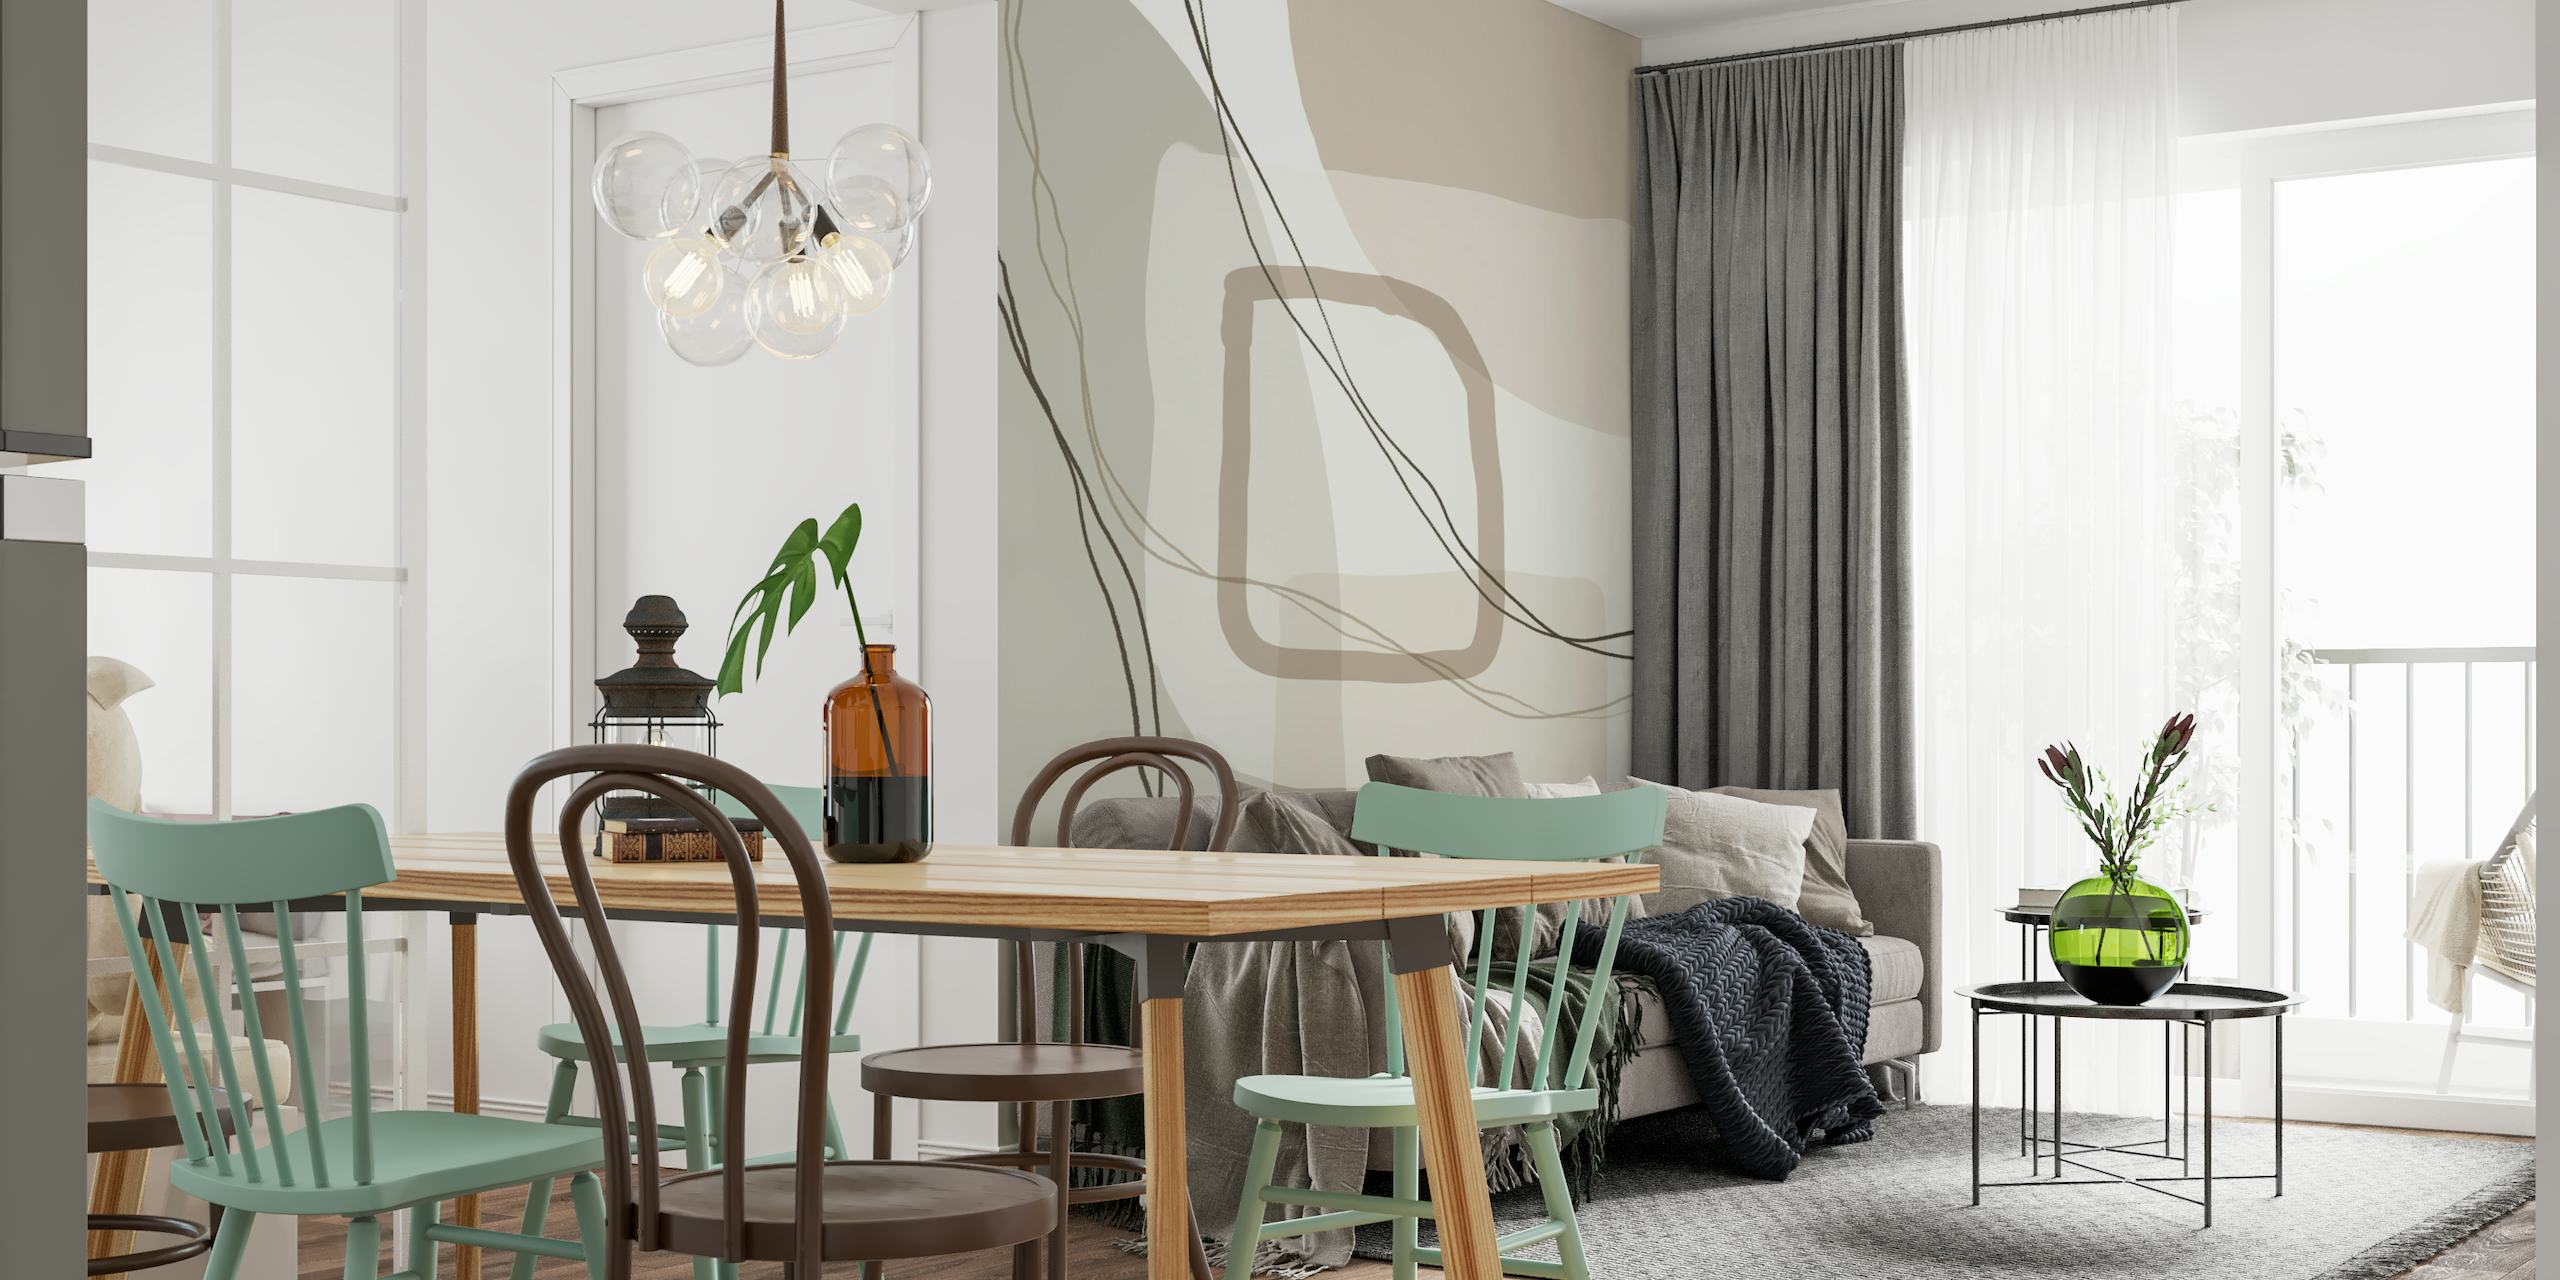 Abstract wall mural featuring intertwined lines and earthy tones